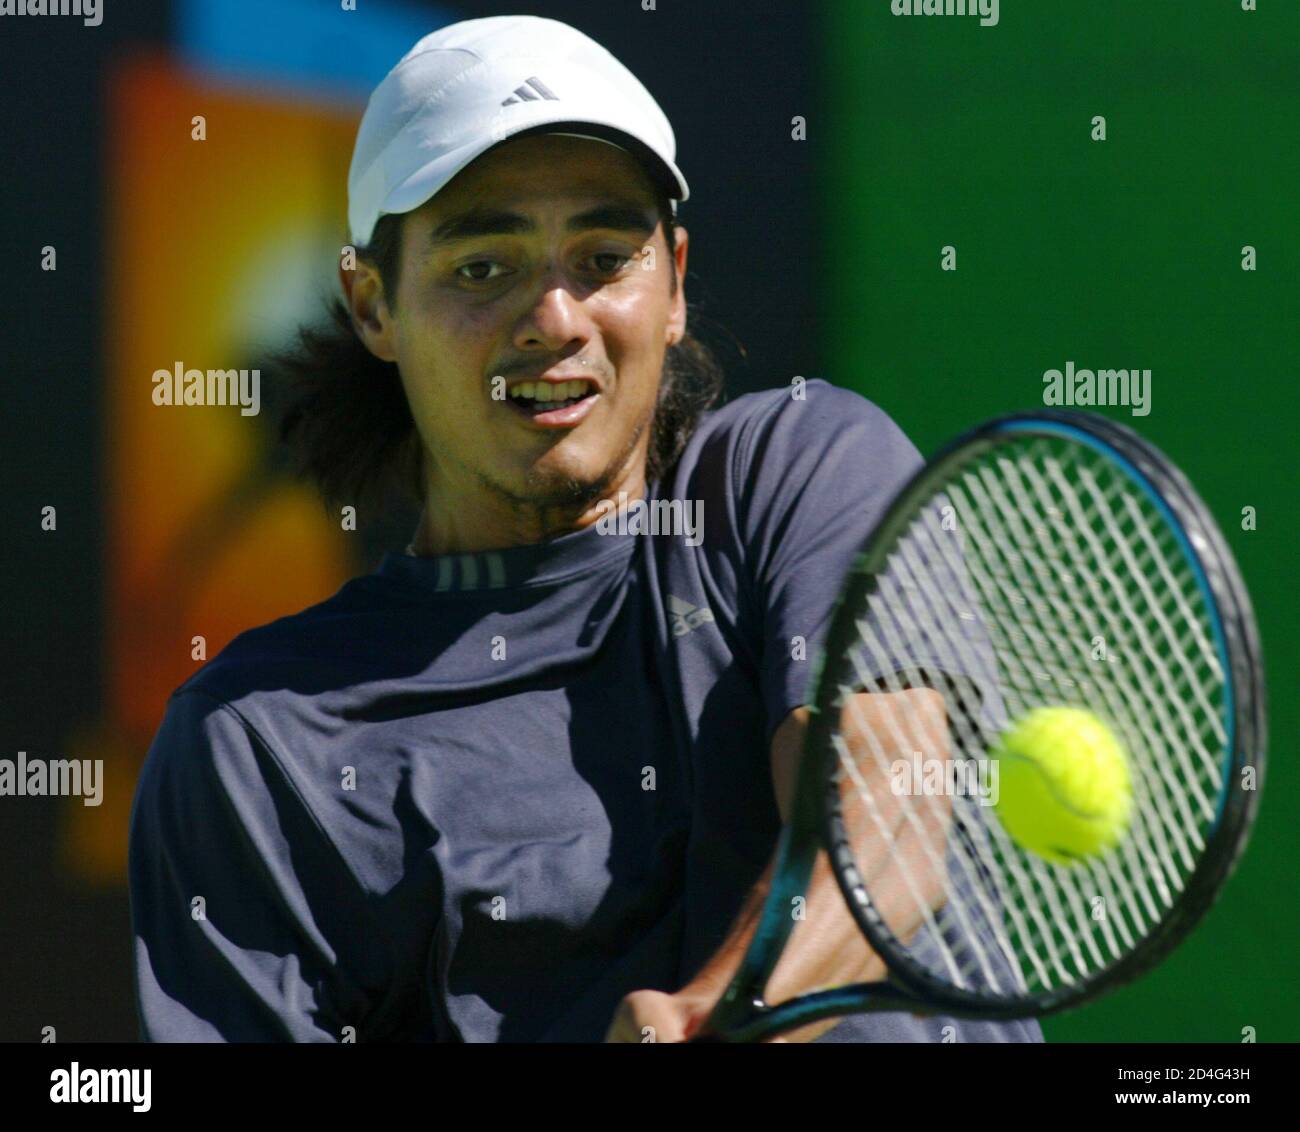 Ecuador's Nicolas Lapentti returns a shot to Spain's Oscar Hernandez during  their first round match at the Australian Open tennis championship in  Melbourne January 19, 2004. REUTERS/David Gray CP/PB Stock Photo -